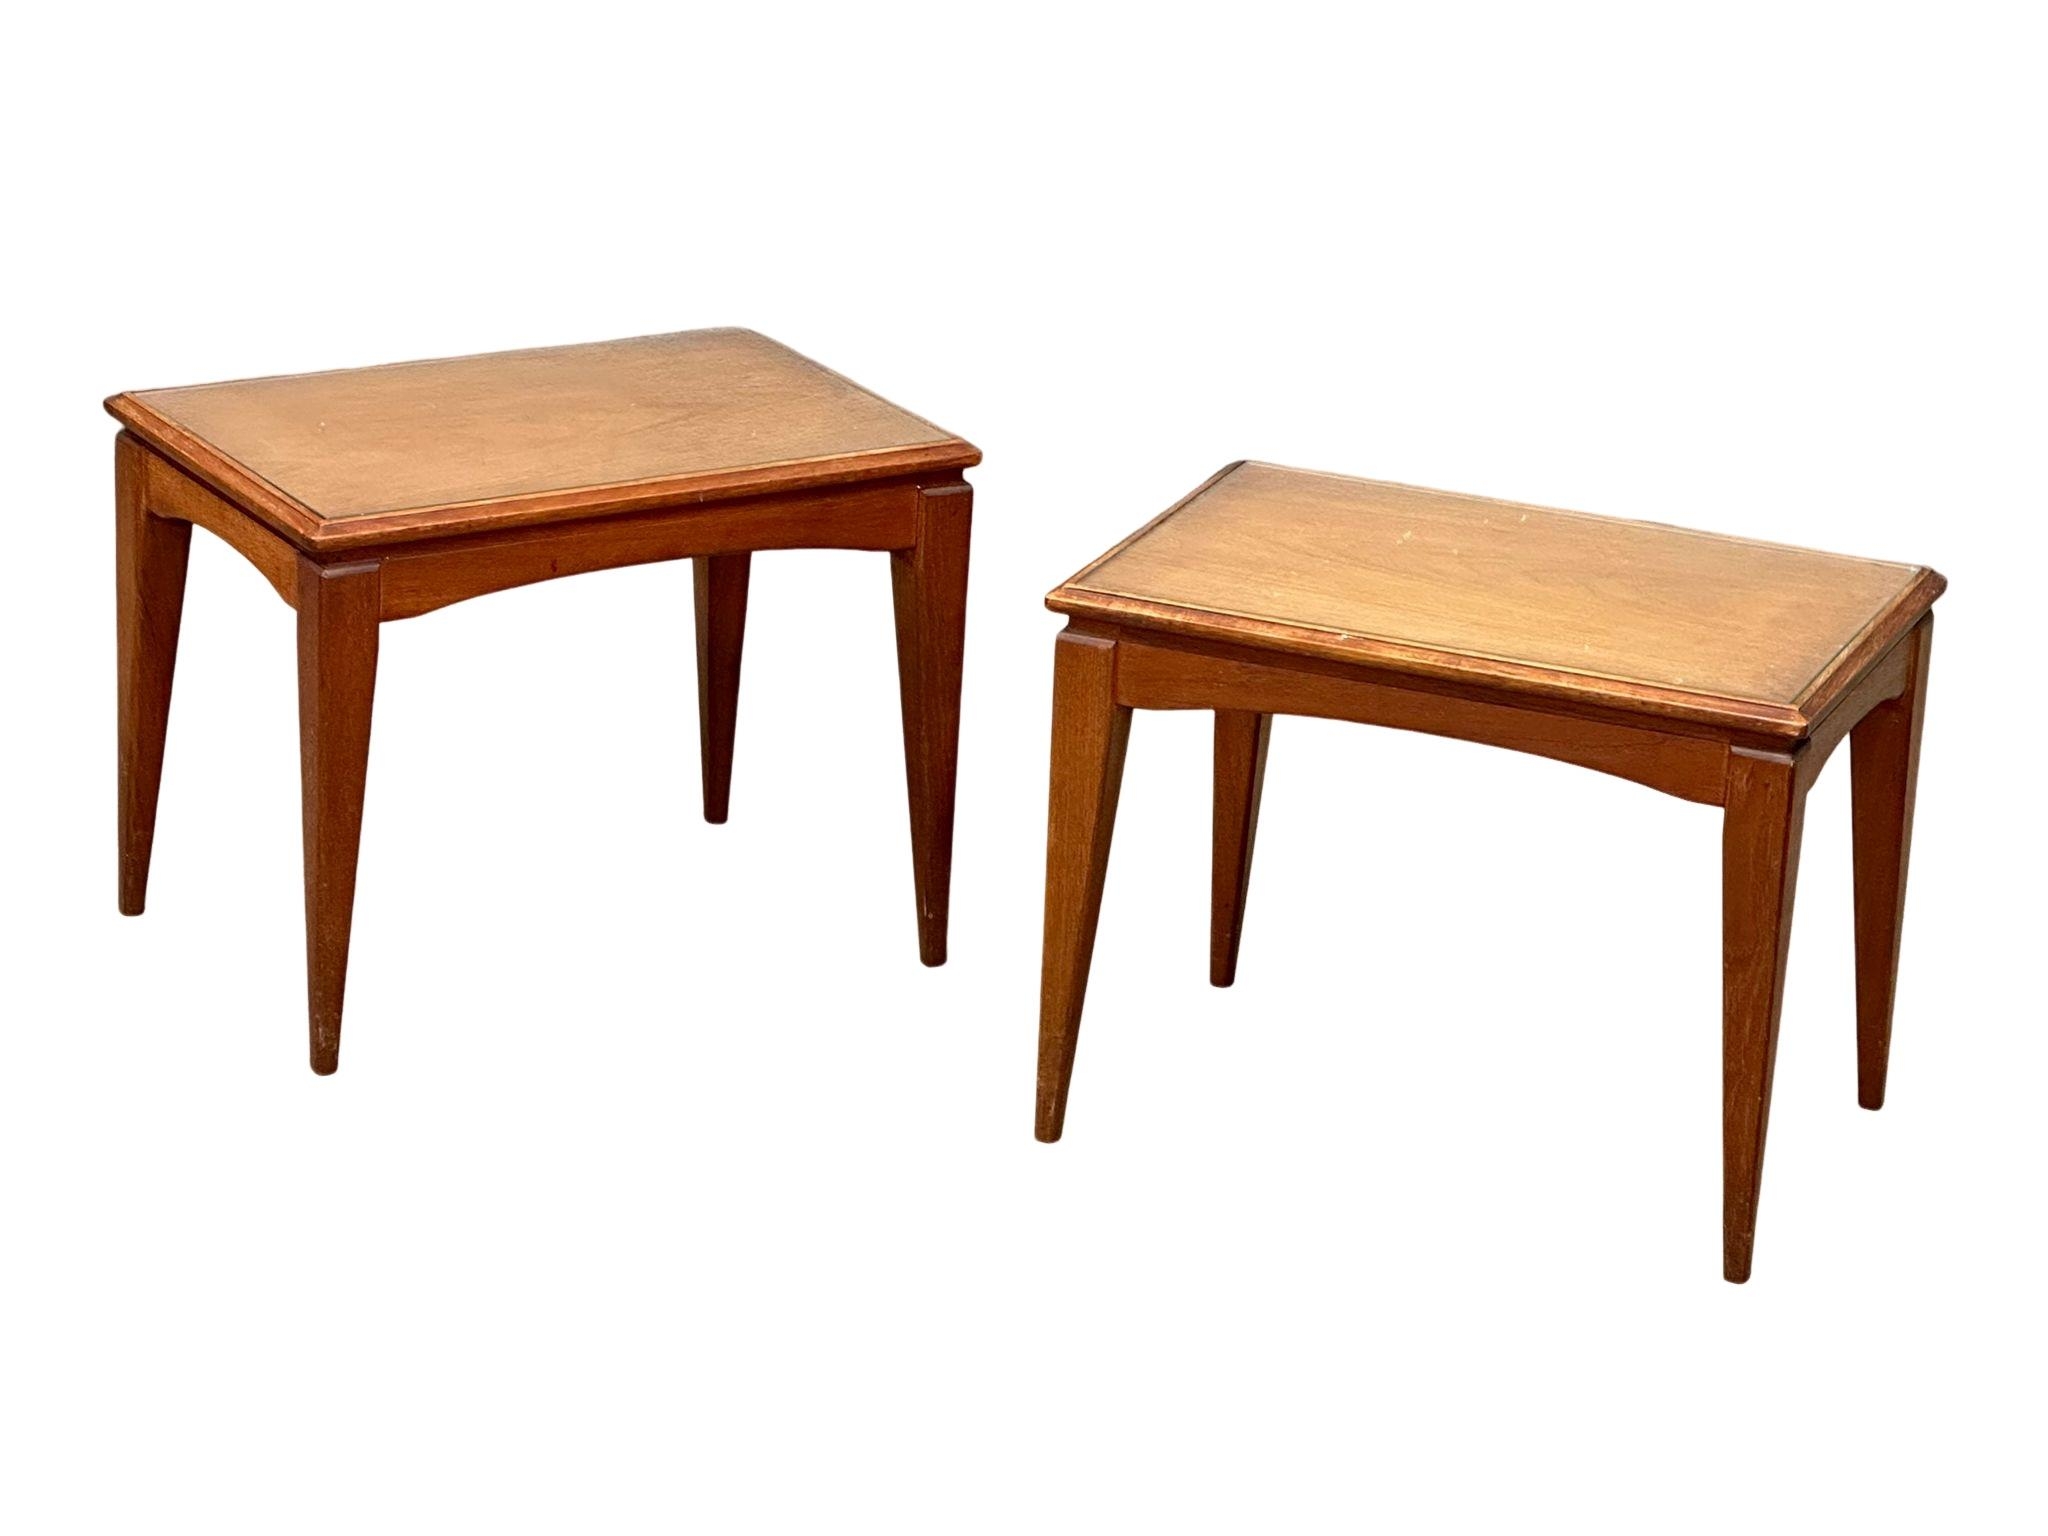 A pair of Mid Century teak lamp tables with glass tops, designed by Richard Hornby for Fyne Ladye